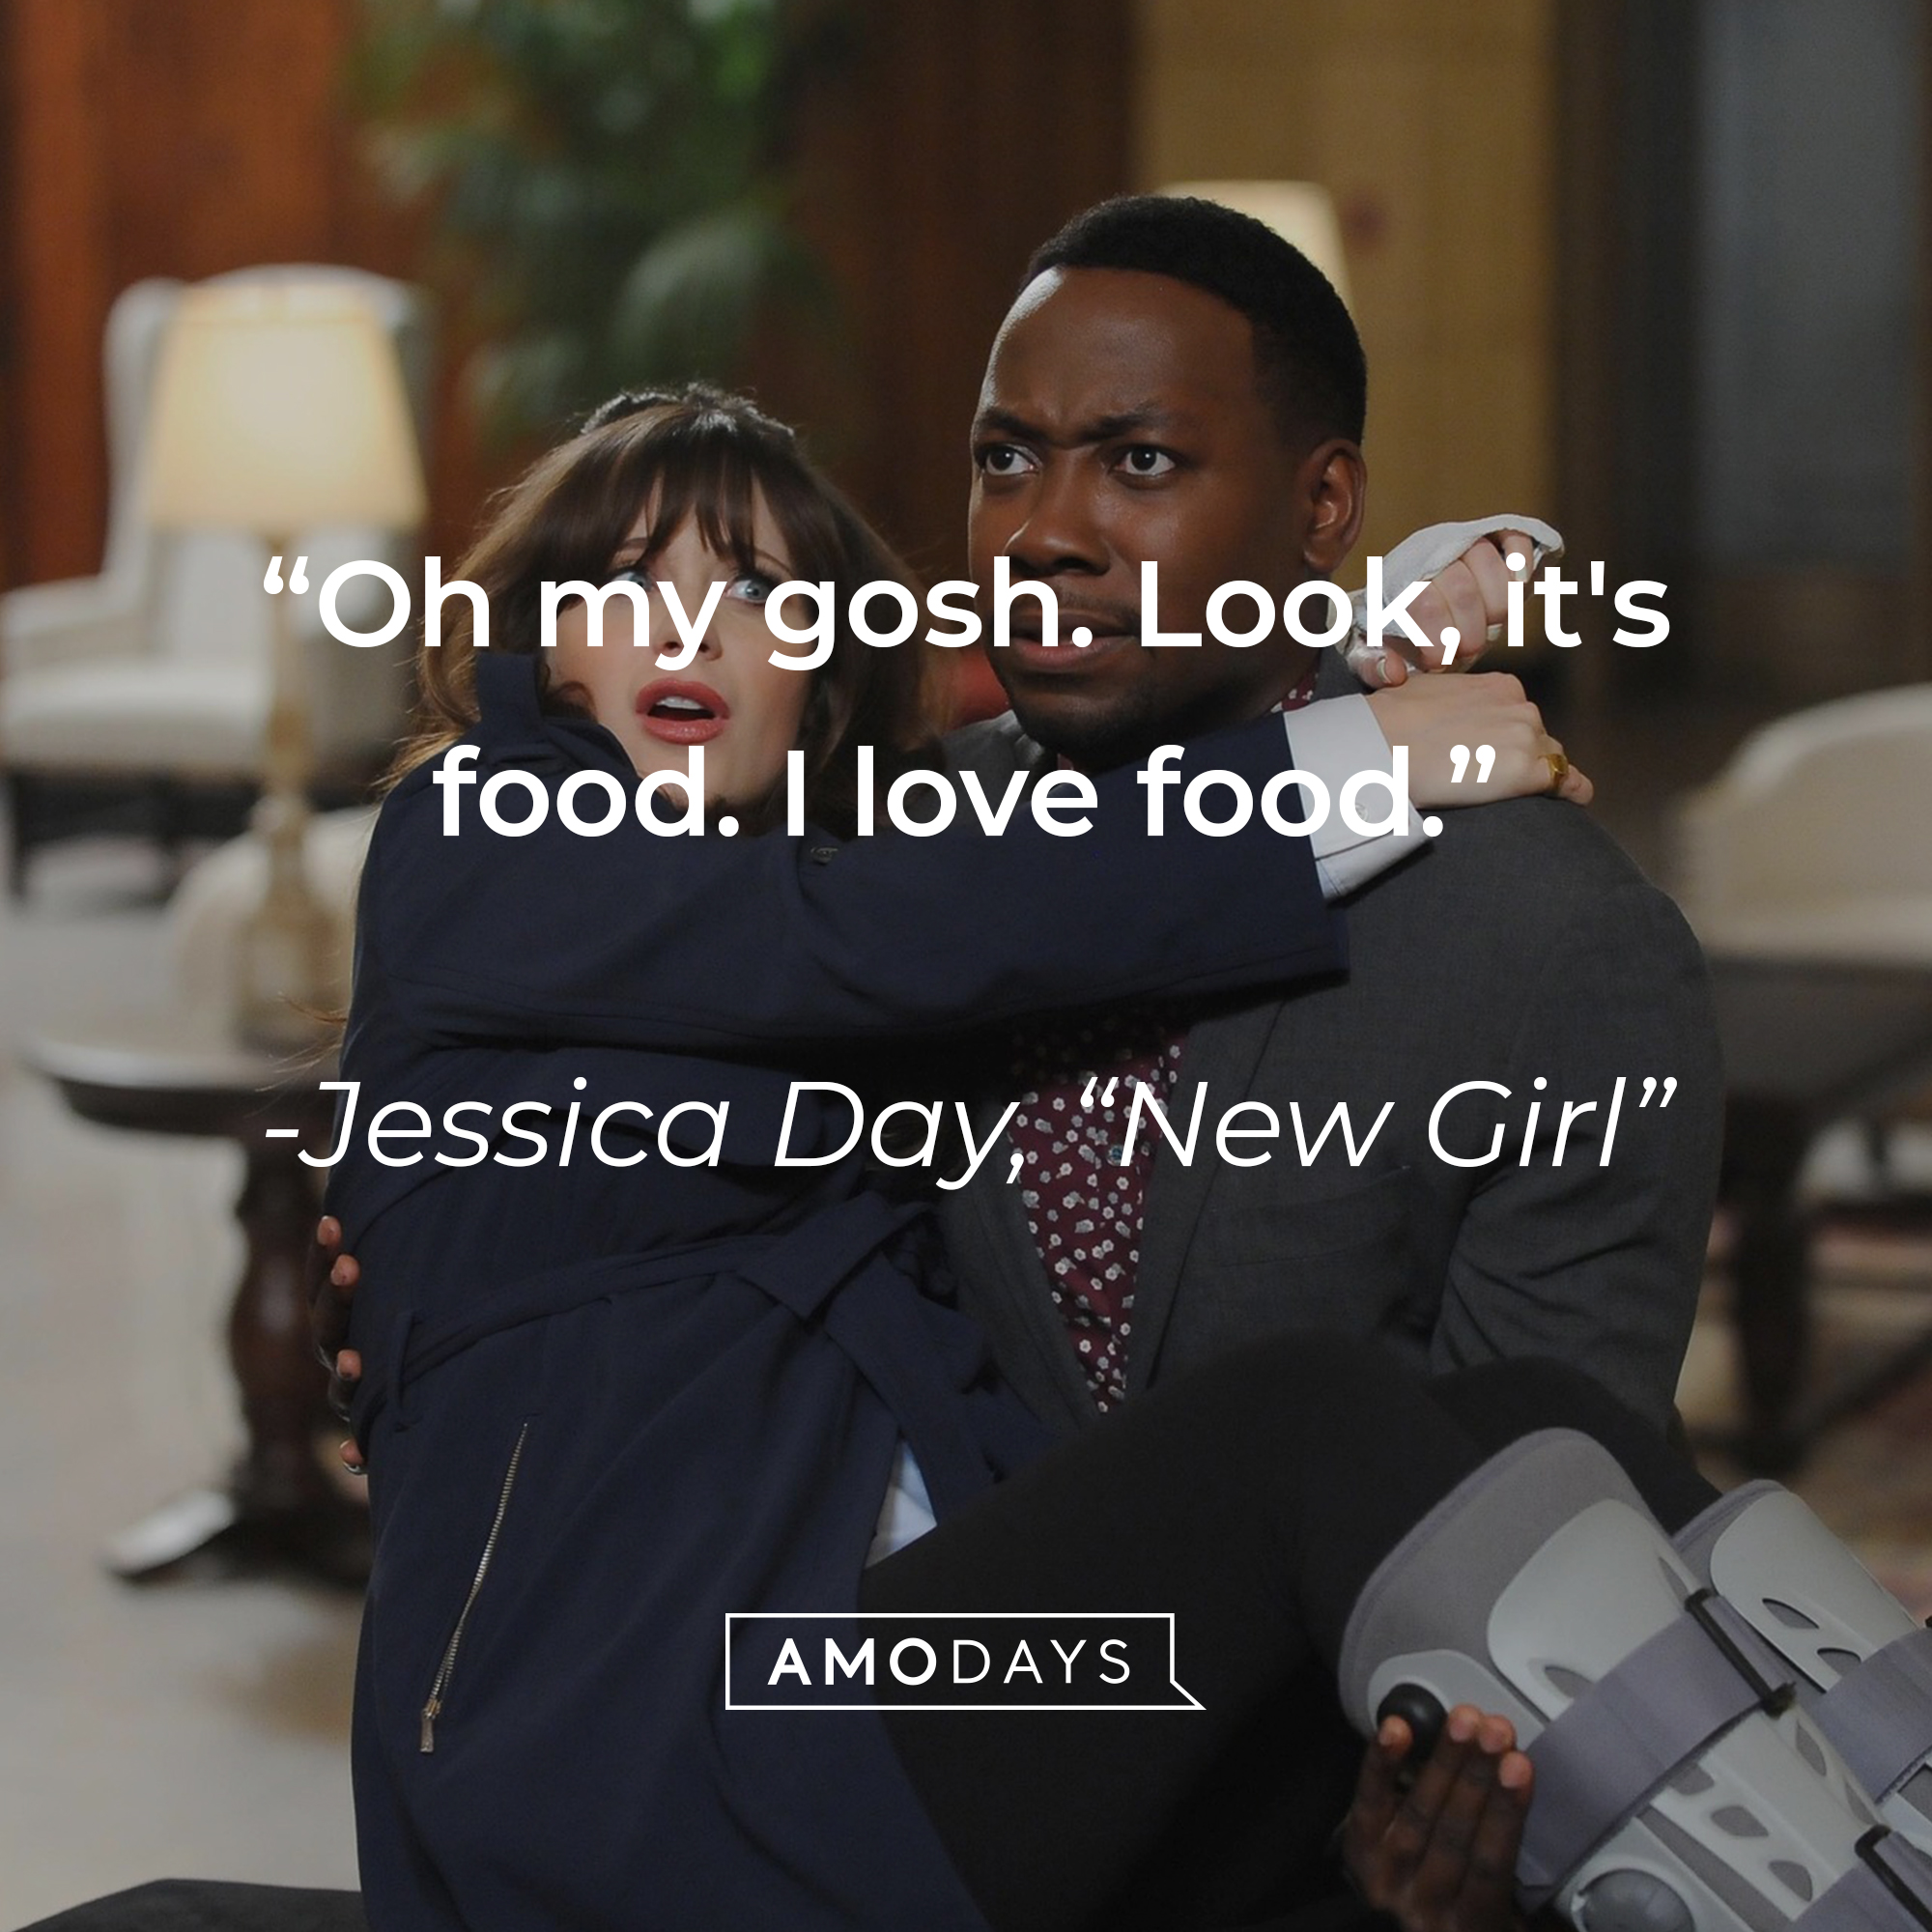 Jessica Day’s quote from “New Girl”: "Oh my gosh. Look, it's food. I love food." | Source: facebook.com/OfficialNewGirl